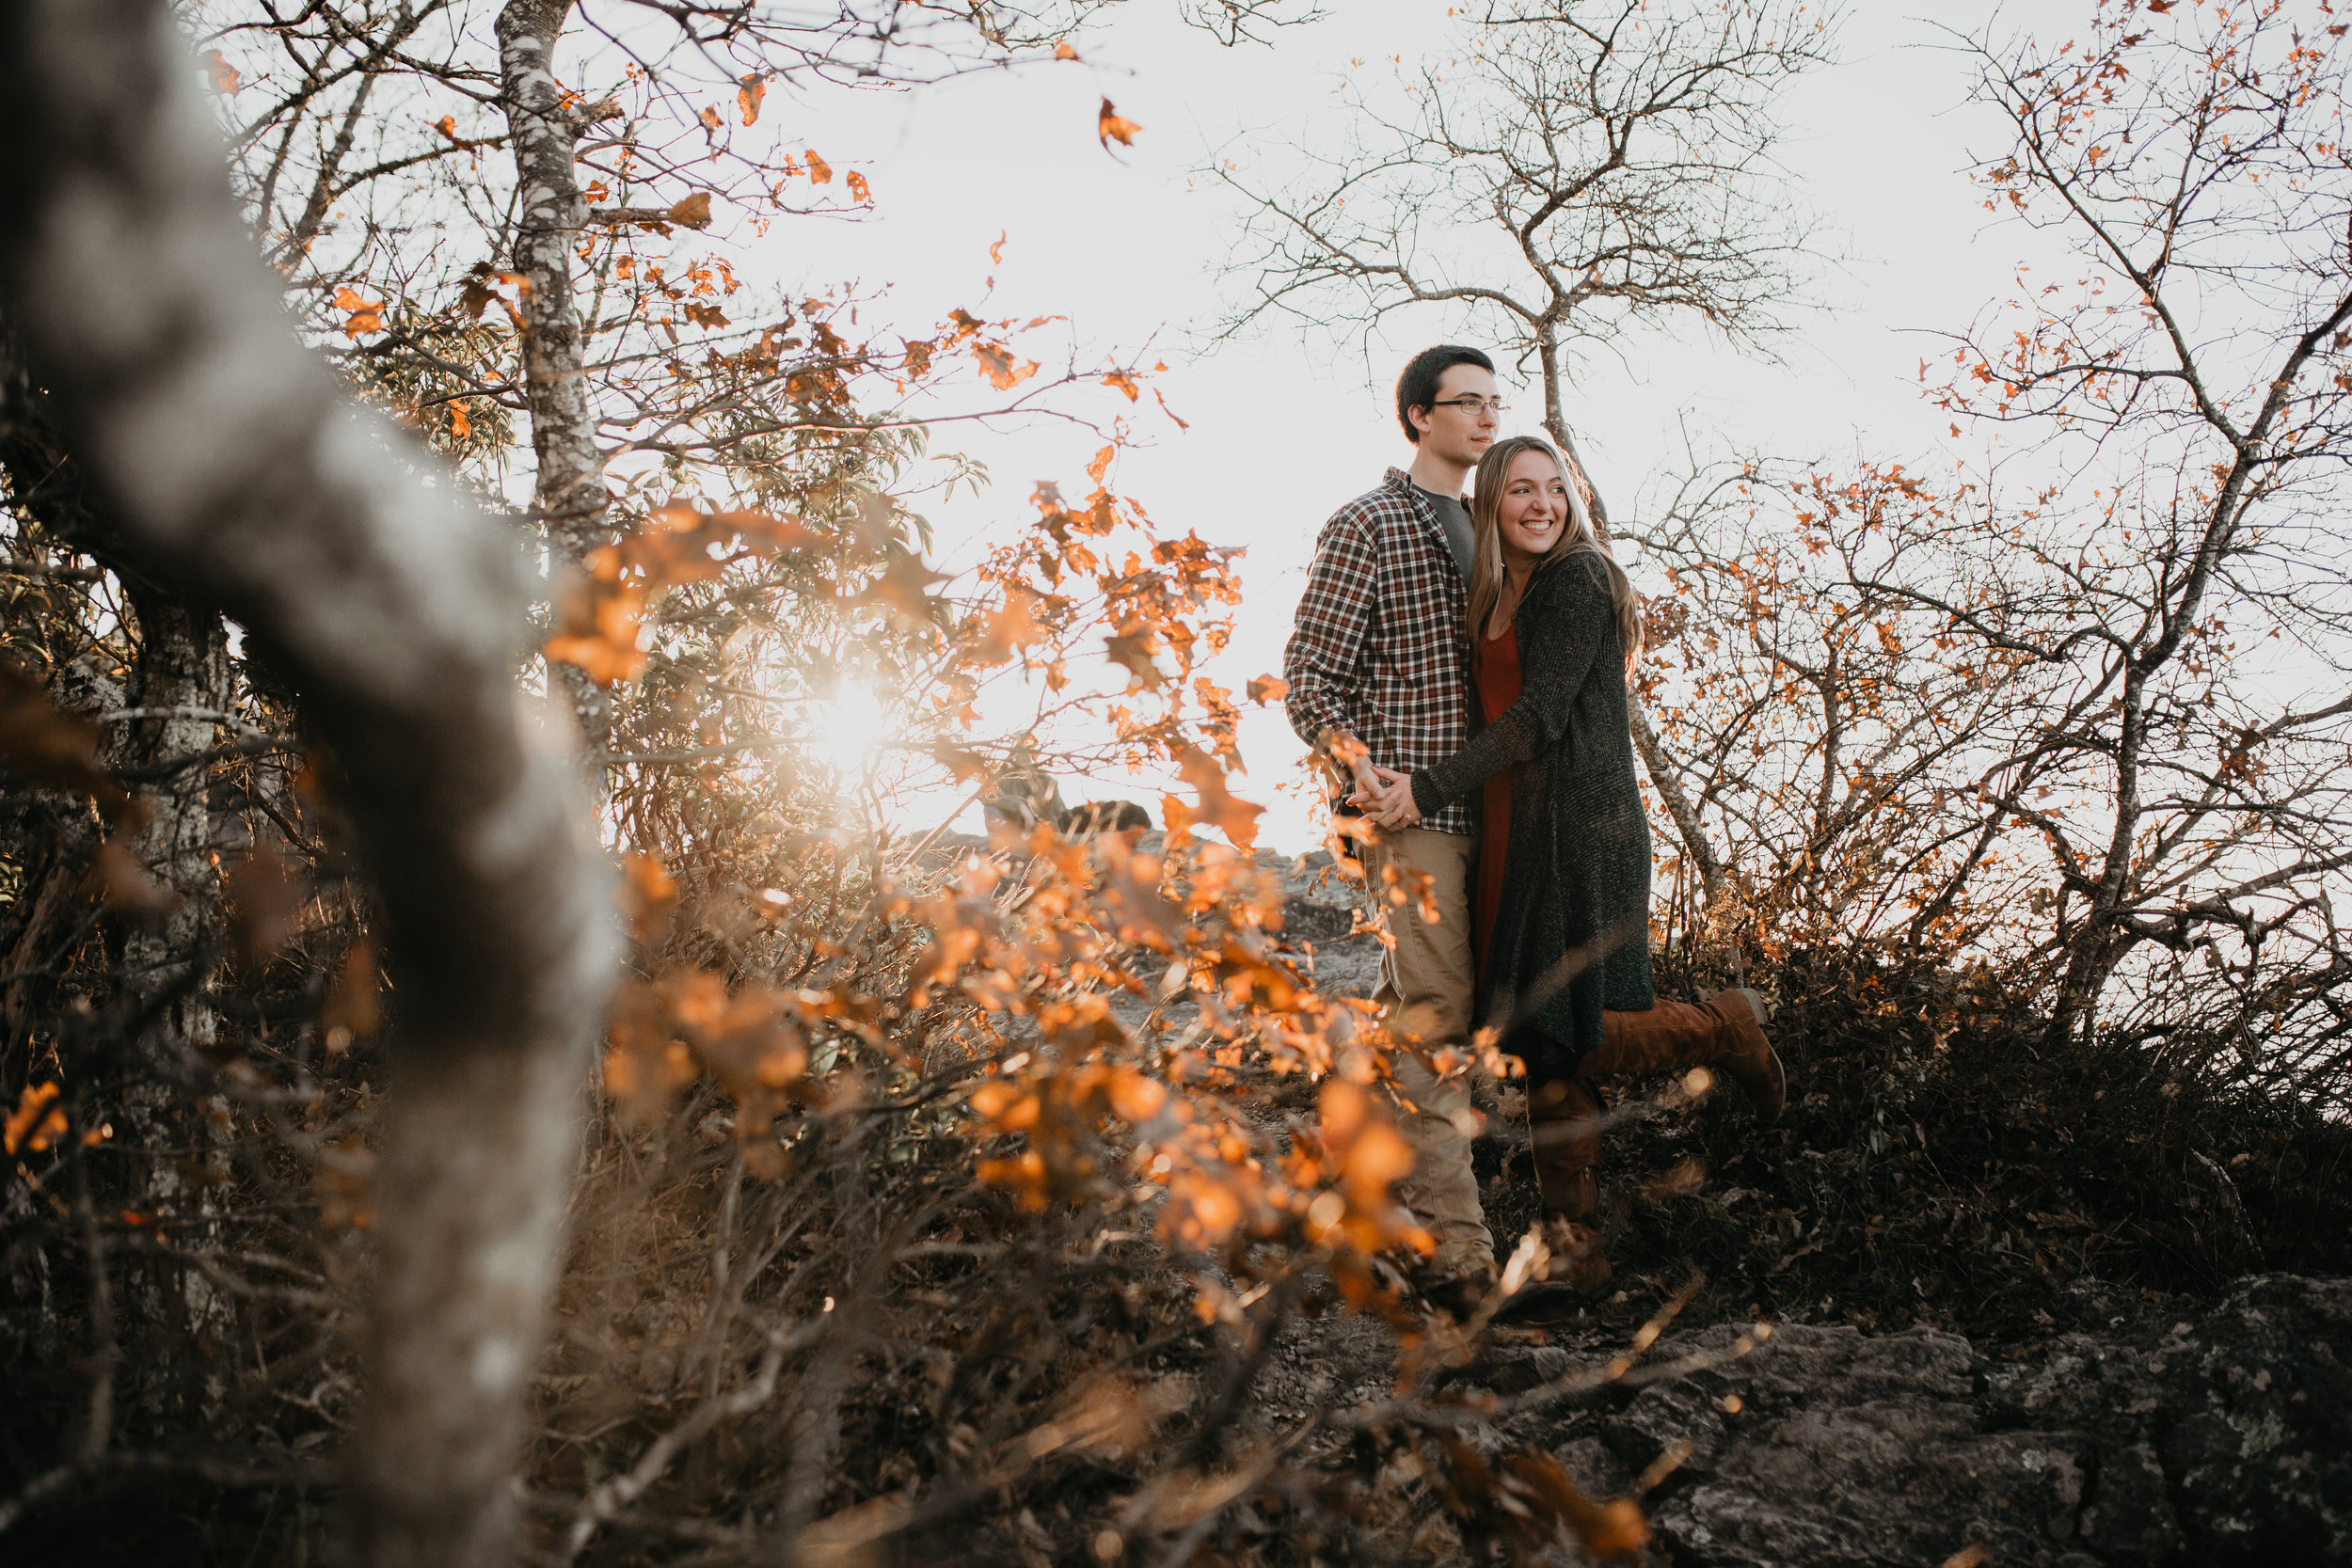 nicole-daacke-photography-shenandoah-national-park-adventure-engagement-session-with-fall-foliage-shenandoah-elopement-photographer-engagement-photos-in-virginia-charlottesville-national-park-adventure-elopement-photographer-3707.jpg